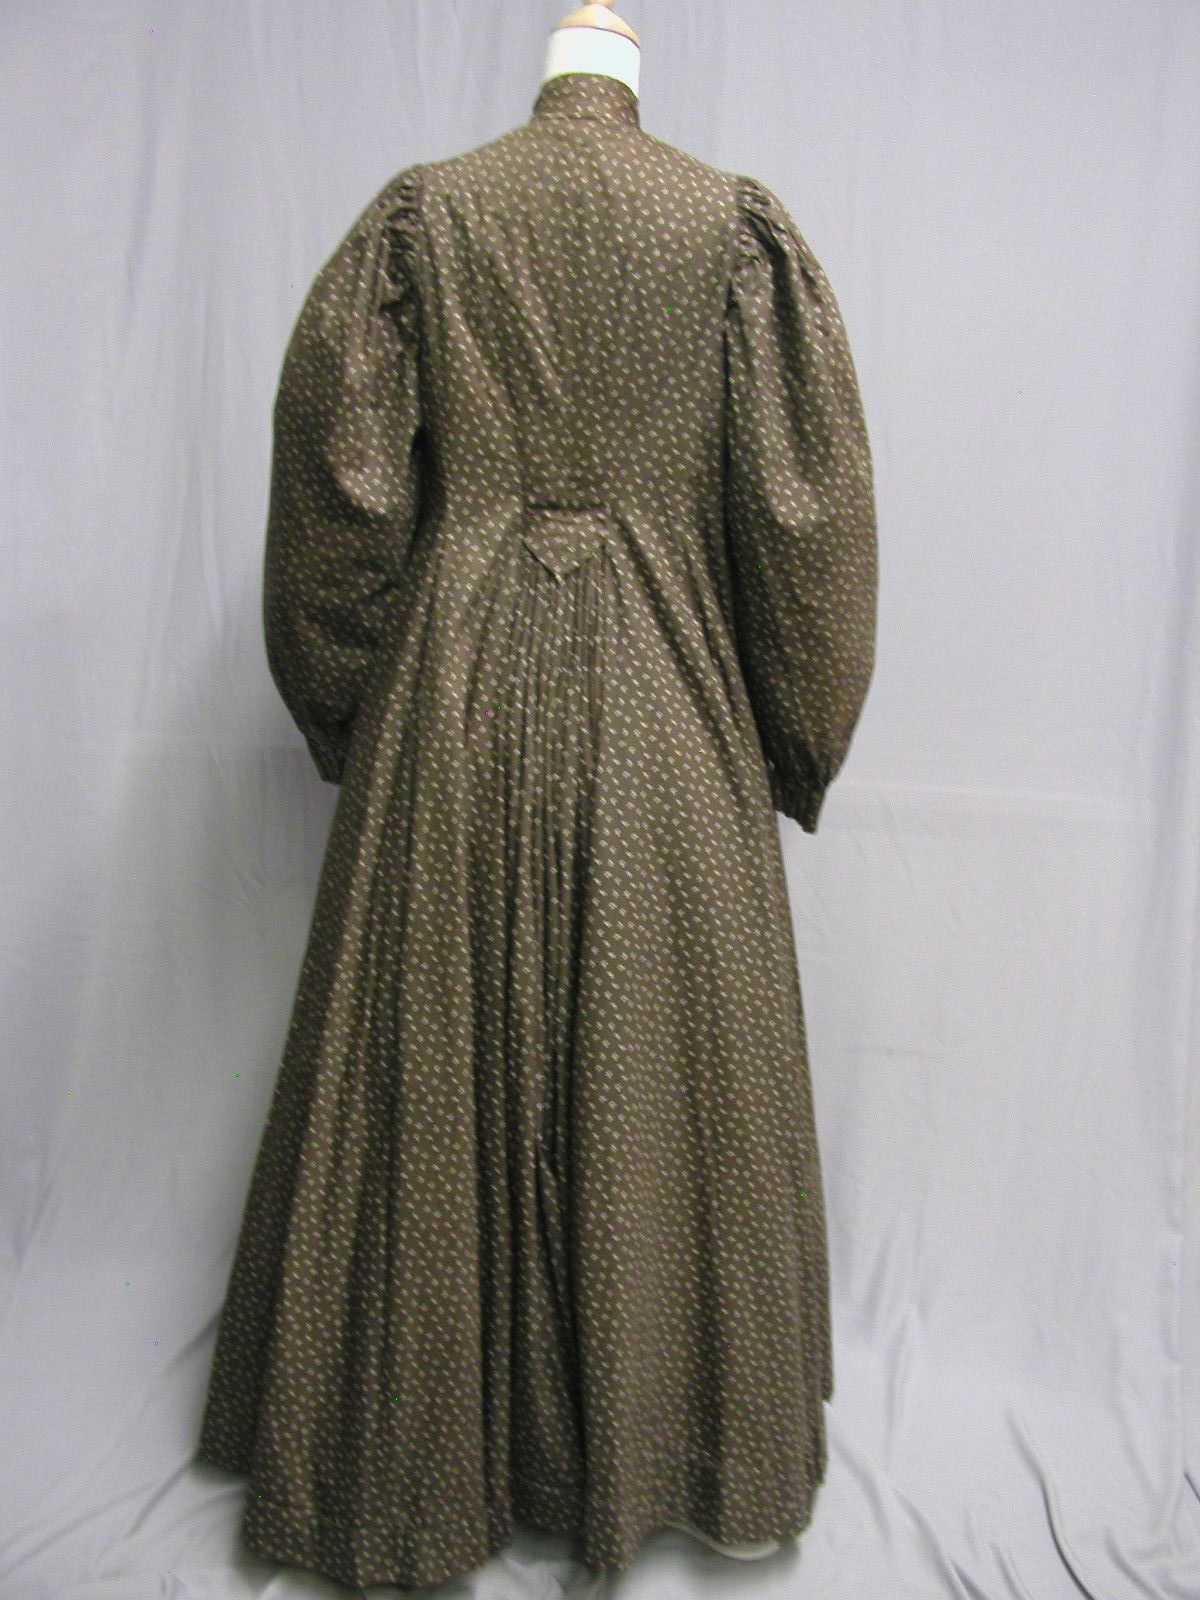 All The Pretty Dresses: 1890's Brown Wrapper Dress